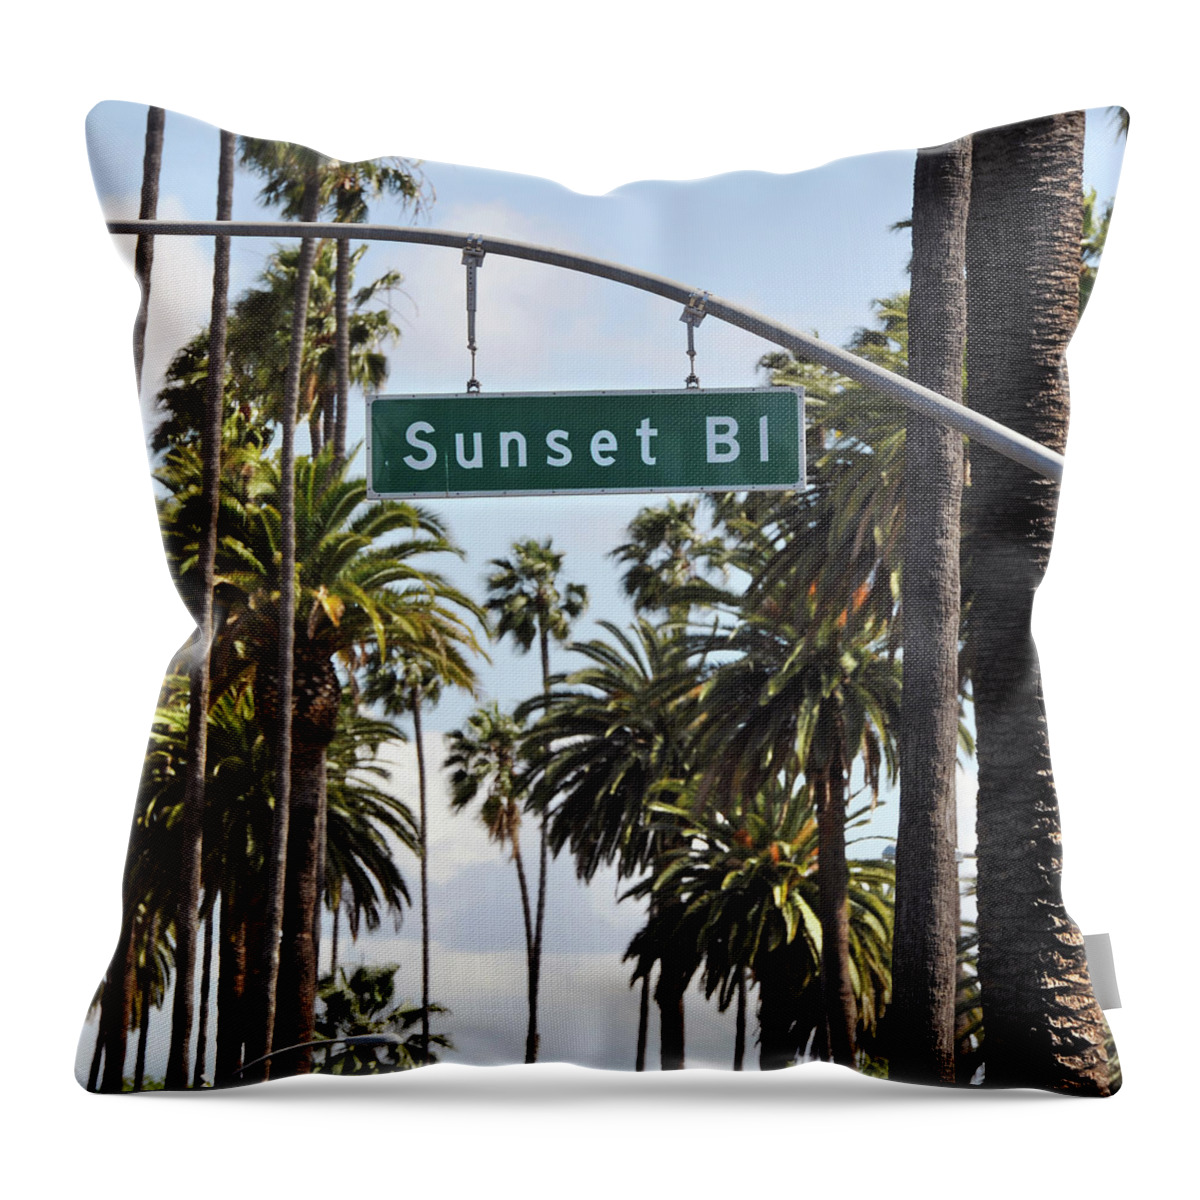 Sunset Strip Throw Pillow featuring the photograph Sunset Blv by Oversnap